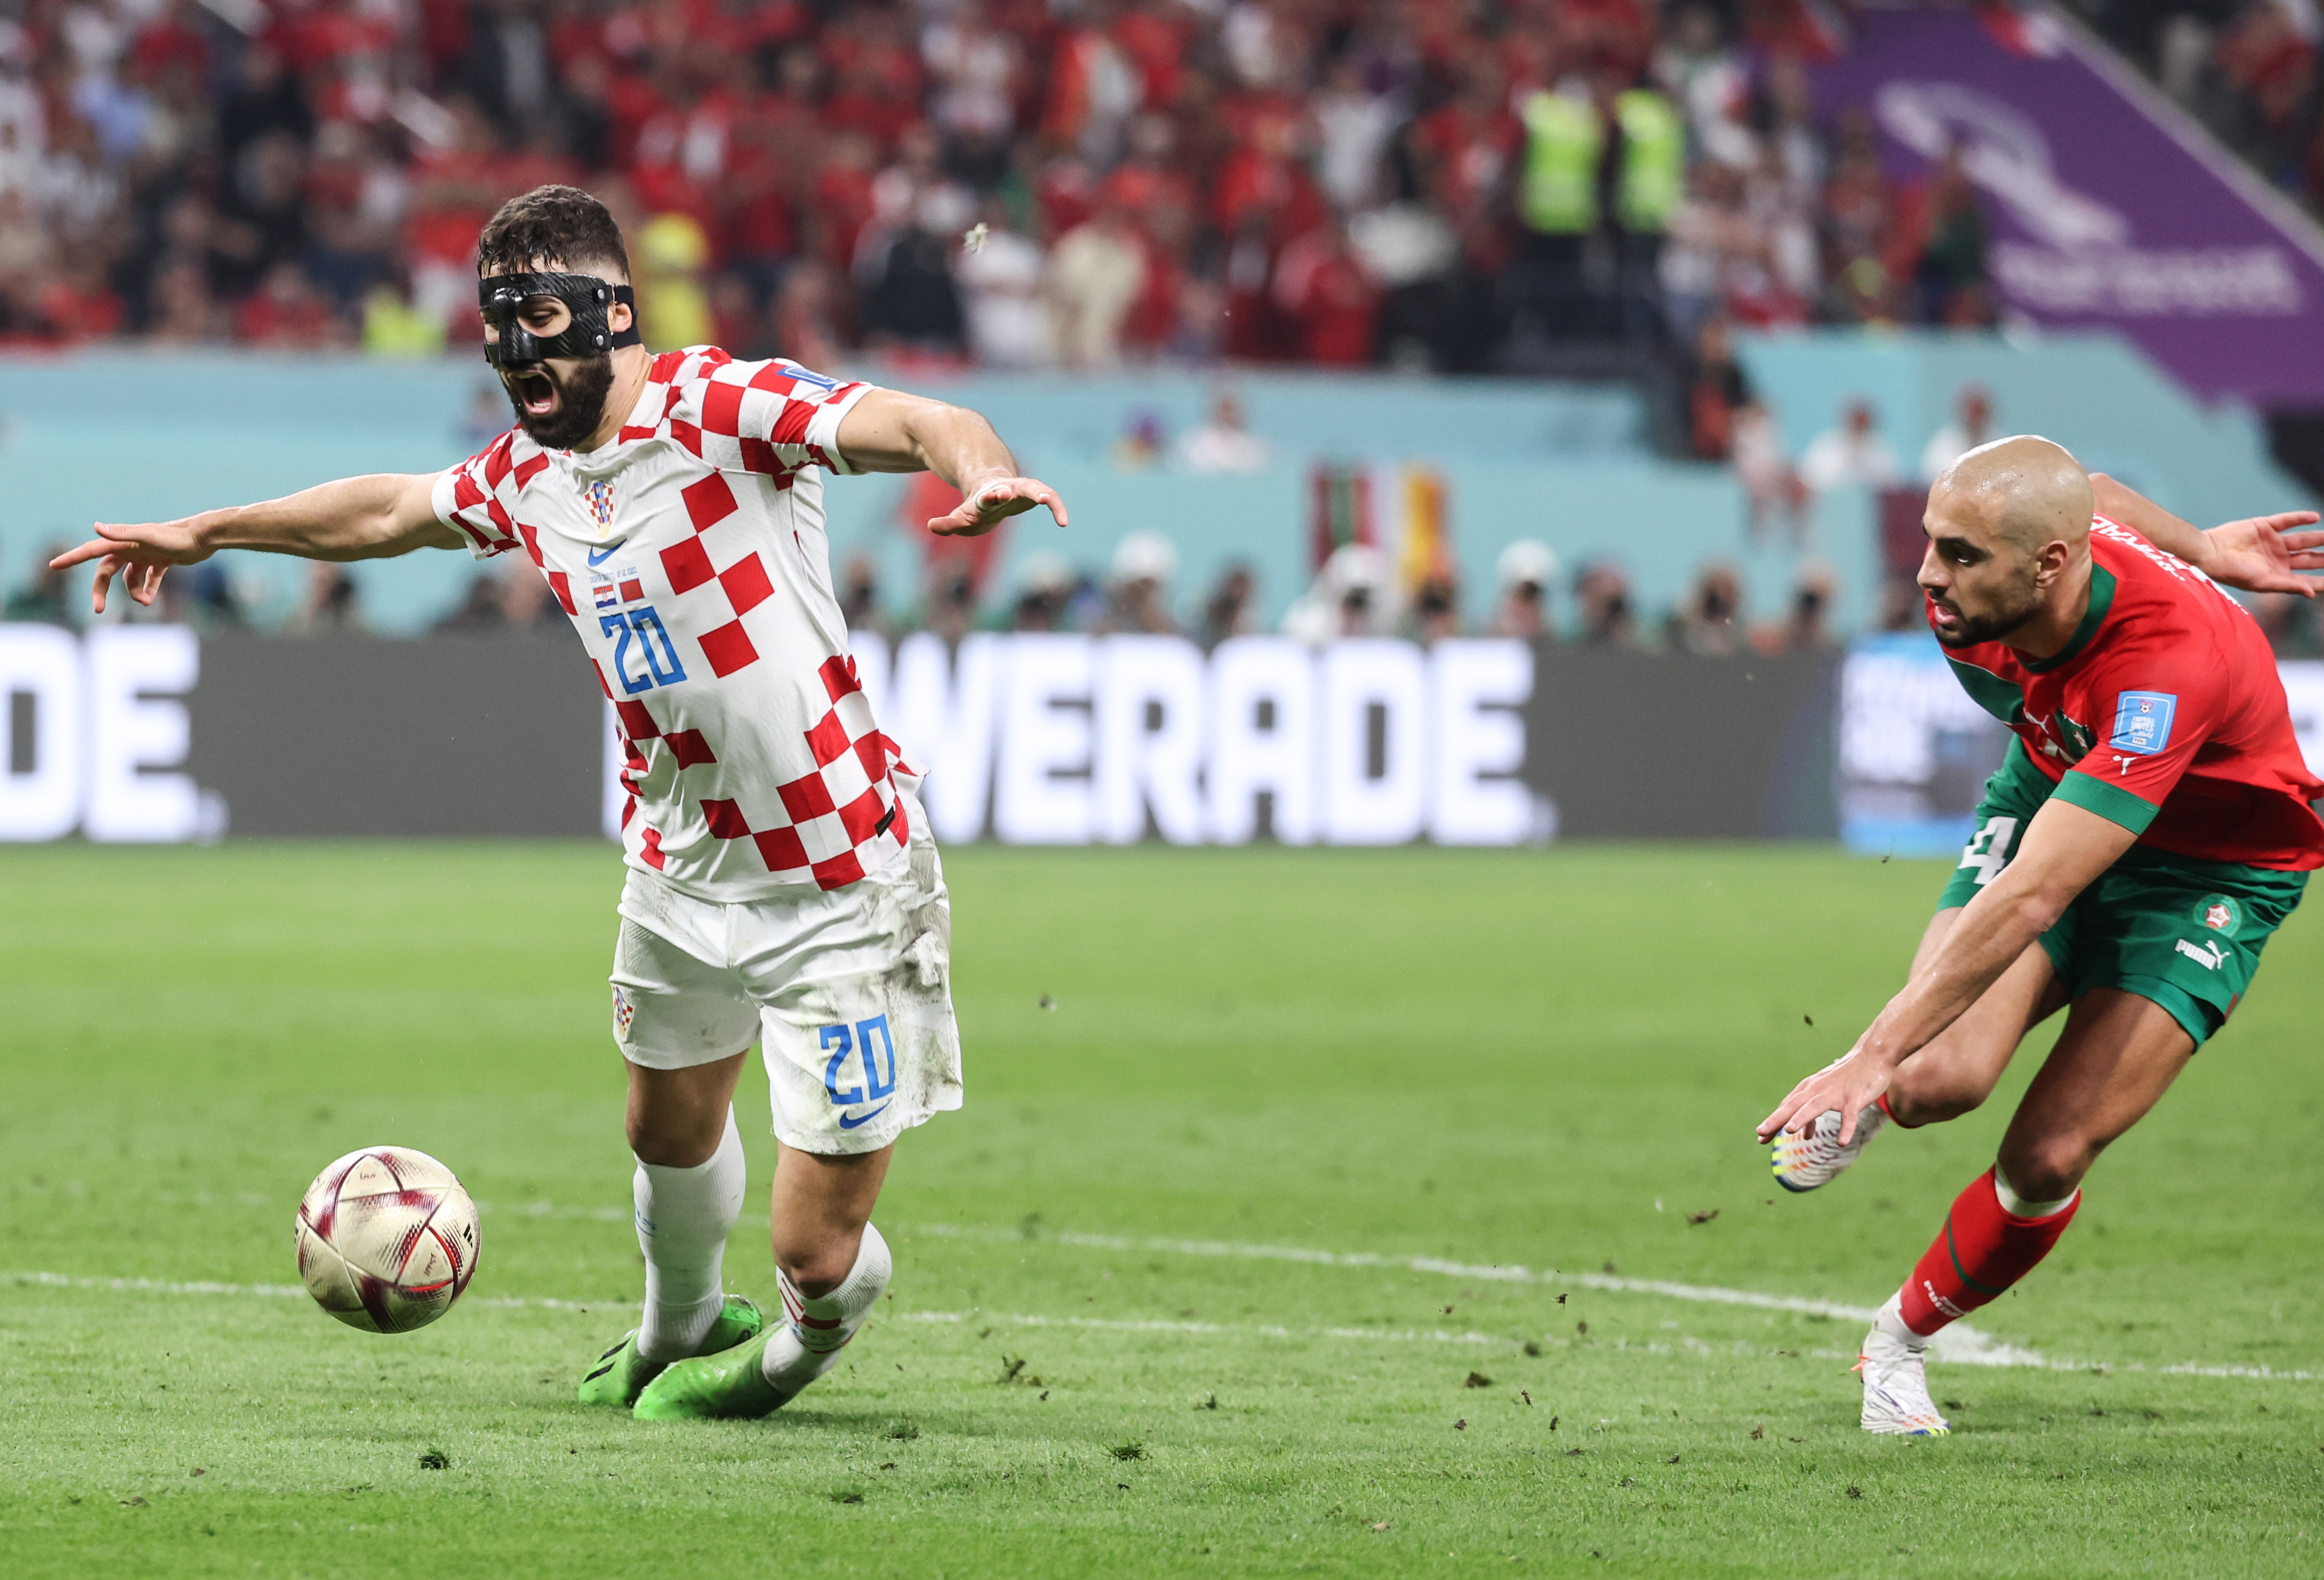 Croatia's Josko Gvardiol goes down in the area after a challenge from Morocco's Sofyan Amrabat in the 2022 World Cup play-offs for third place.